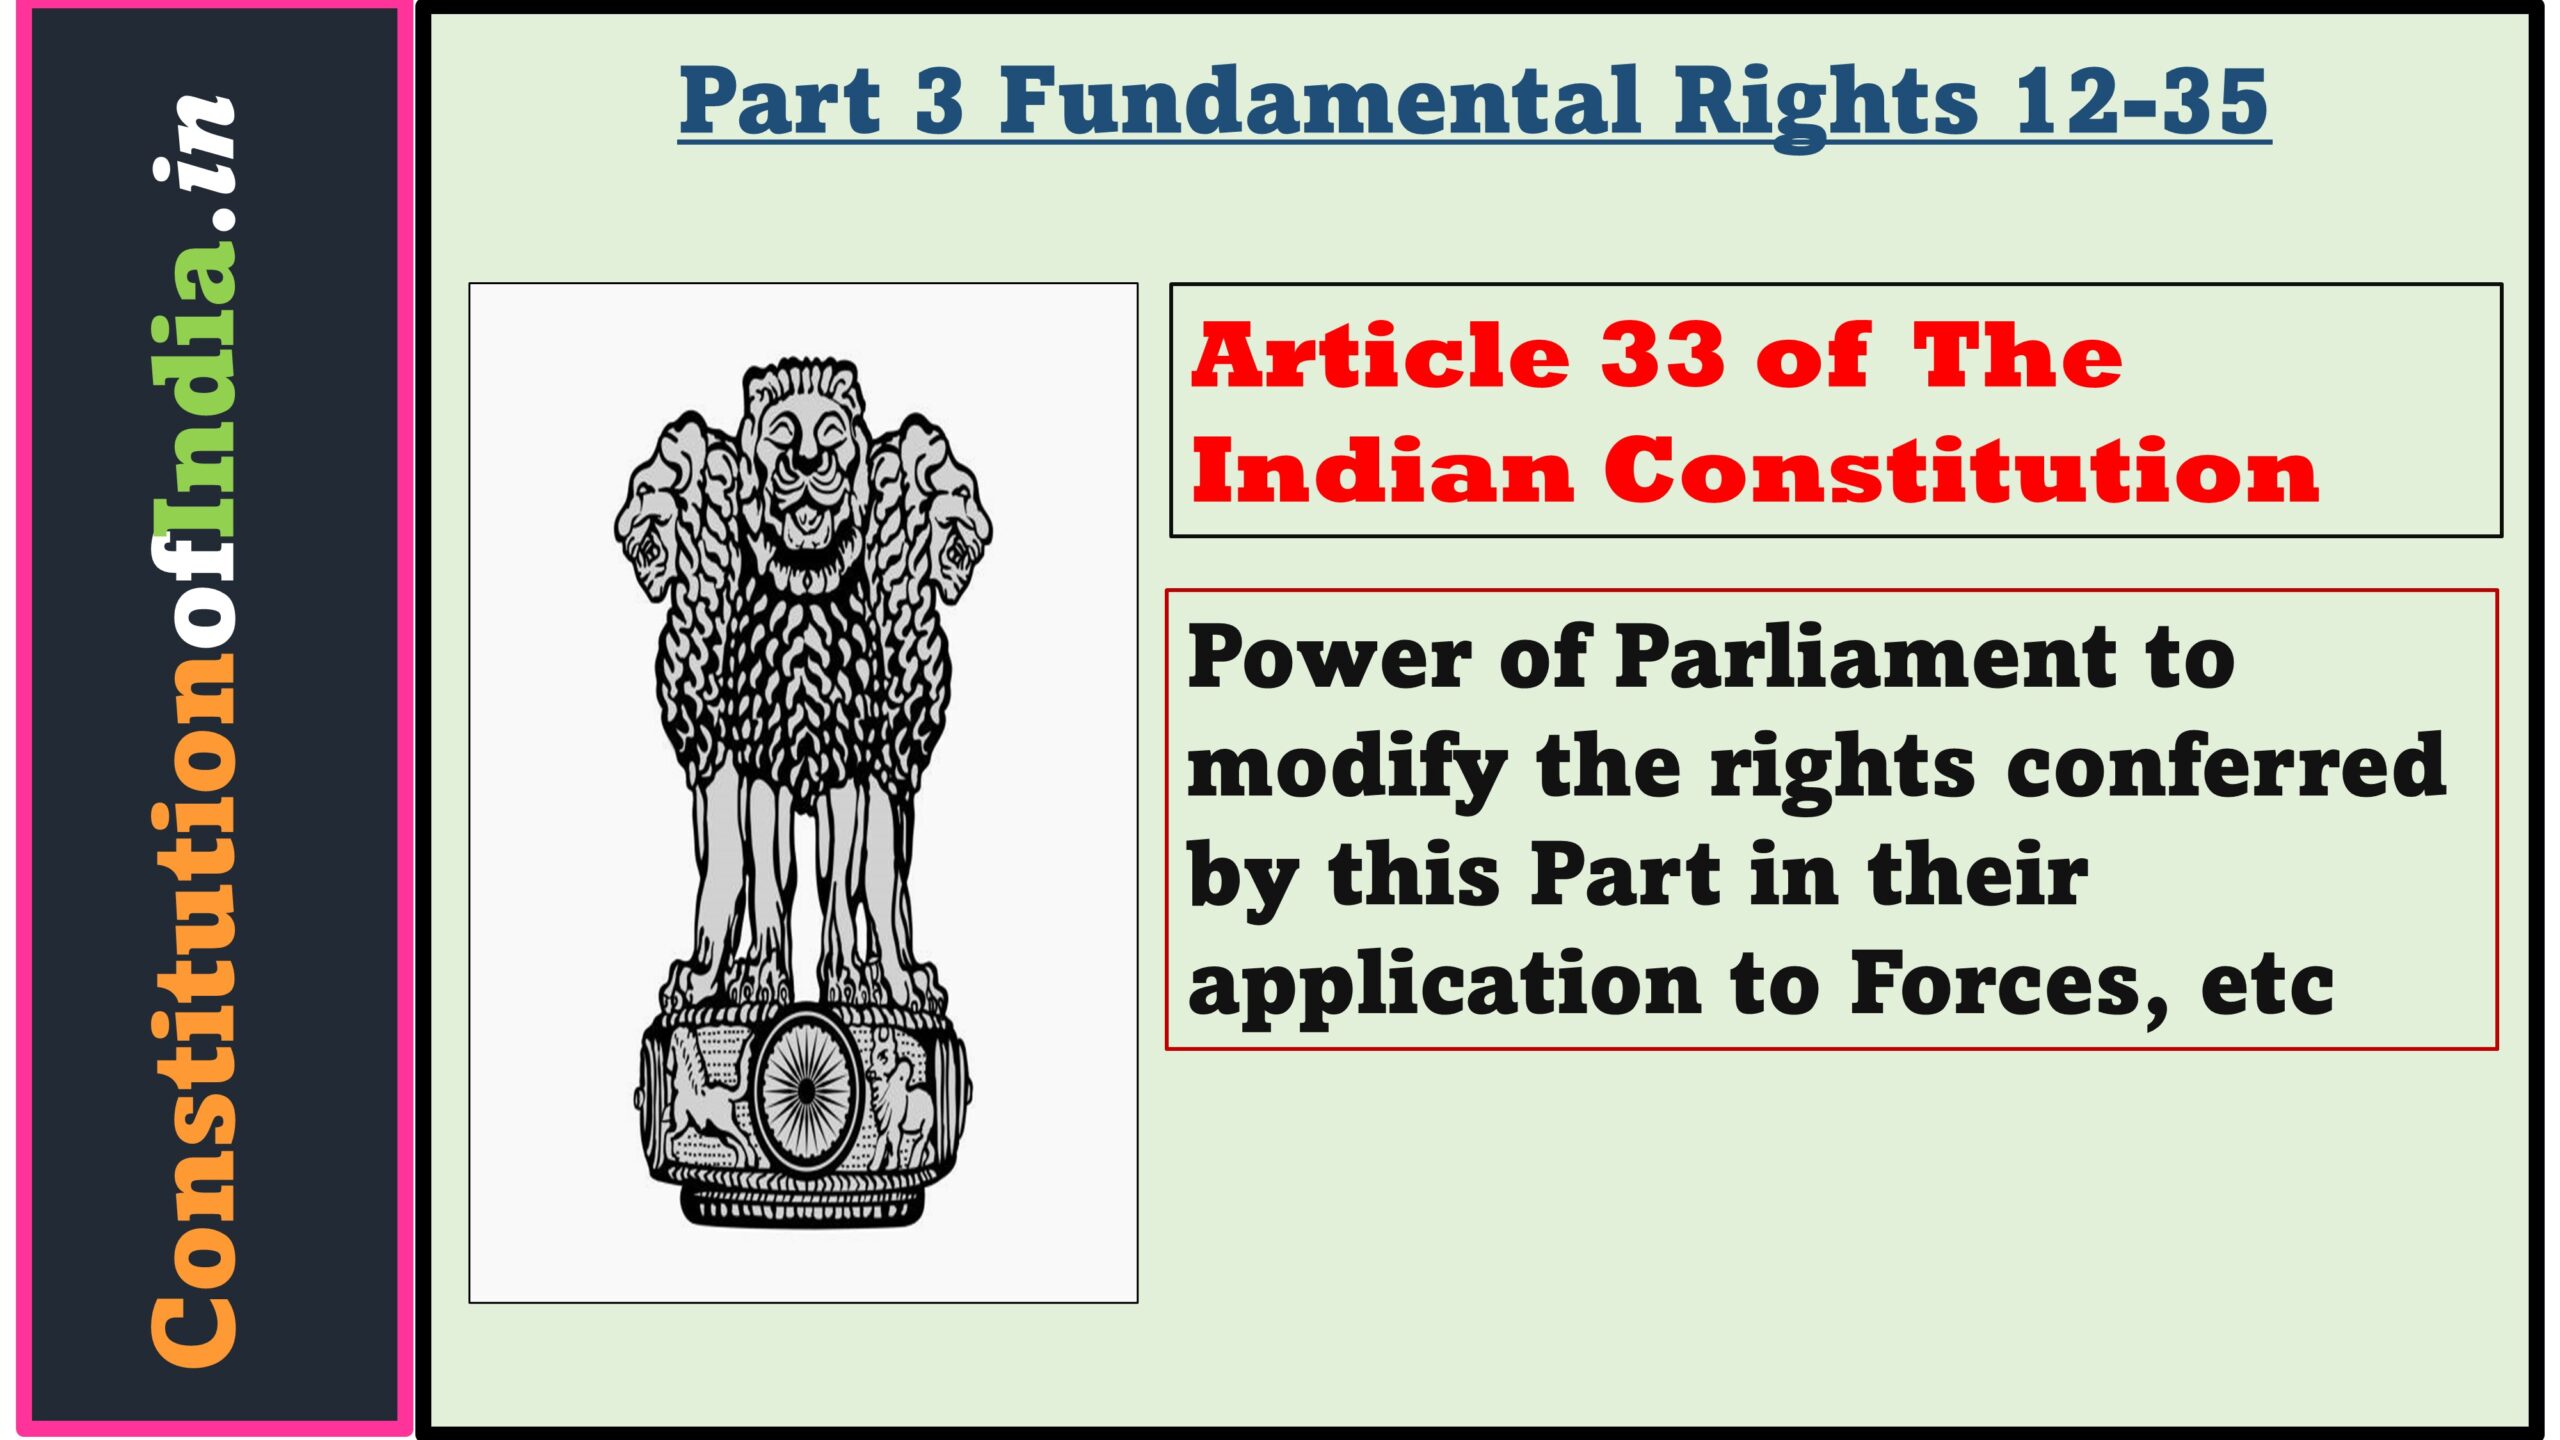 Article 33 of Indian Constitution